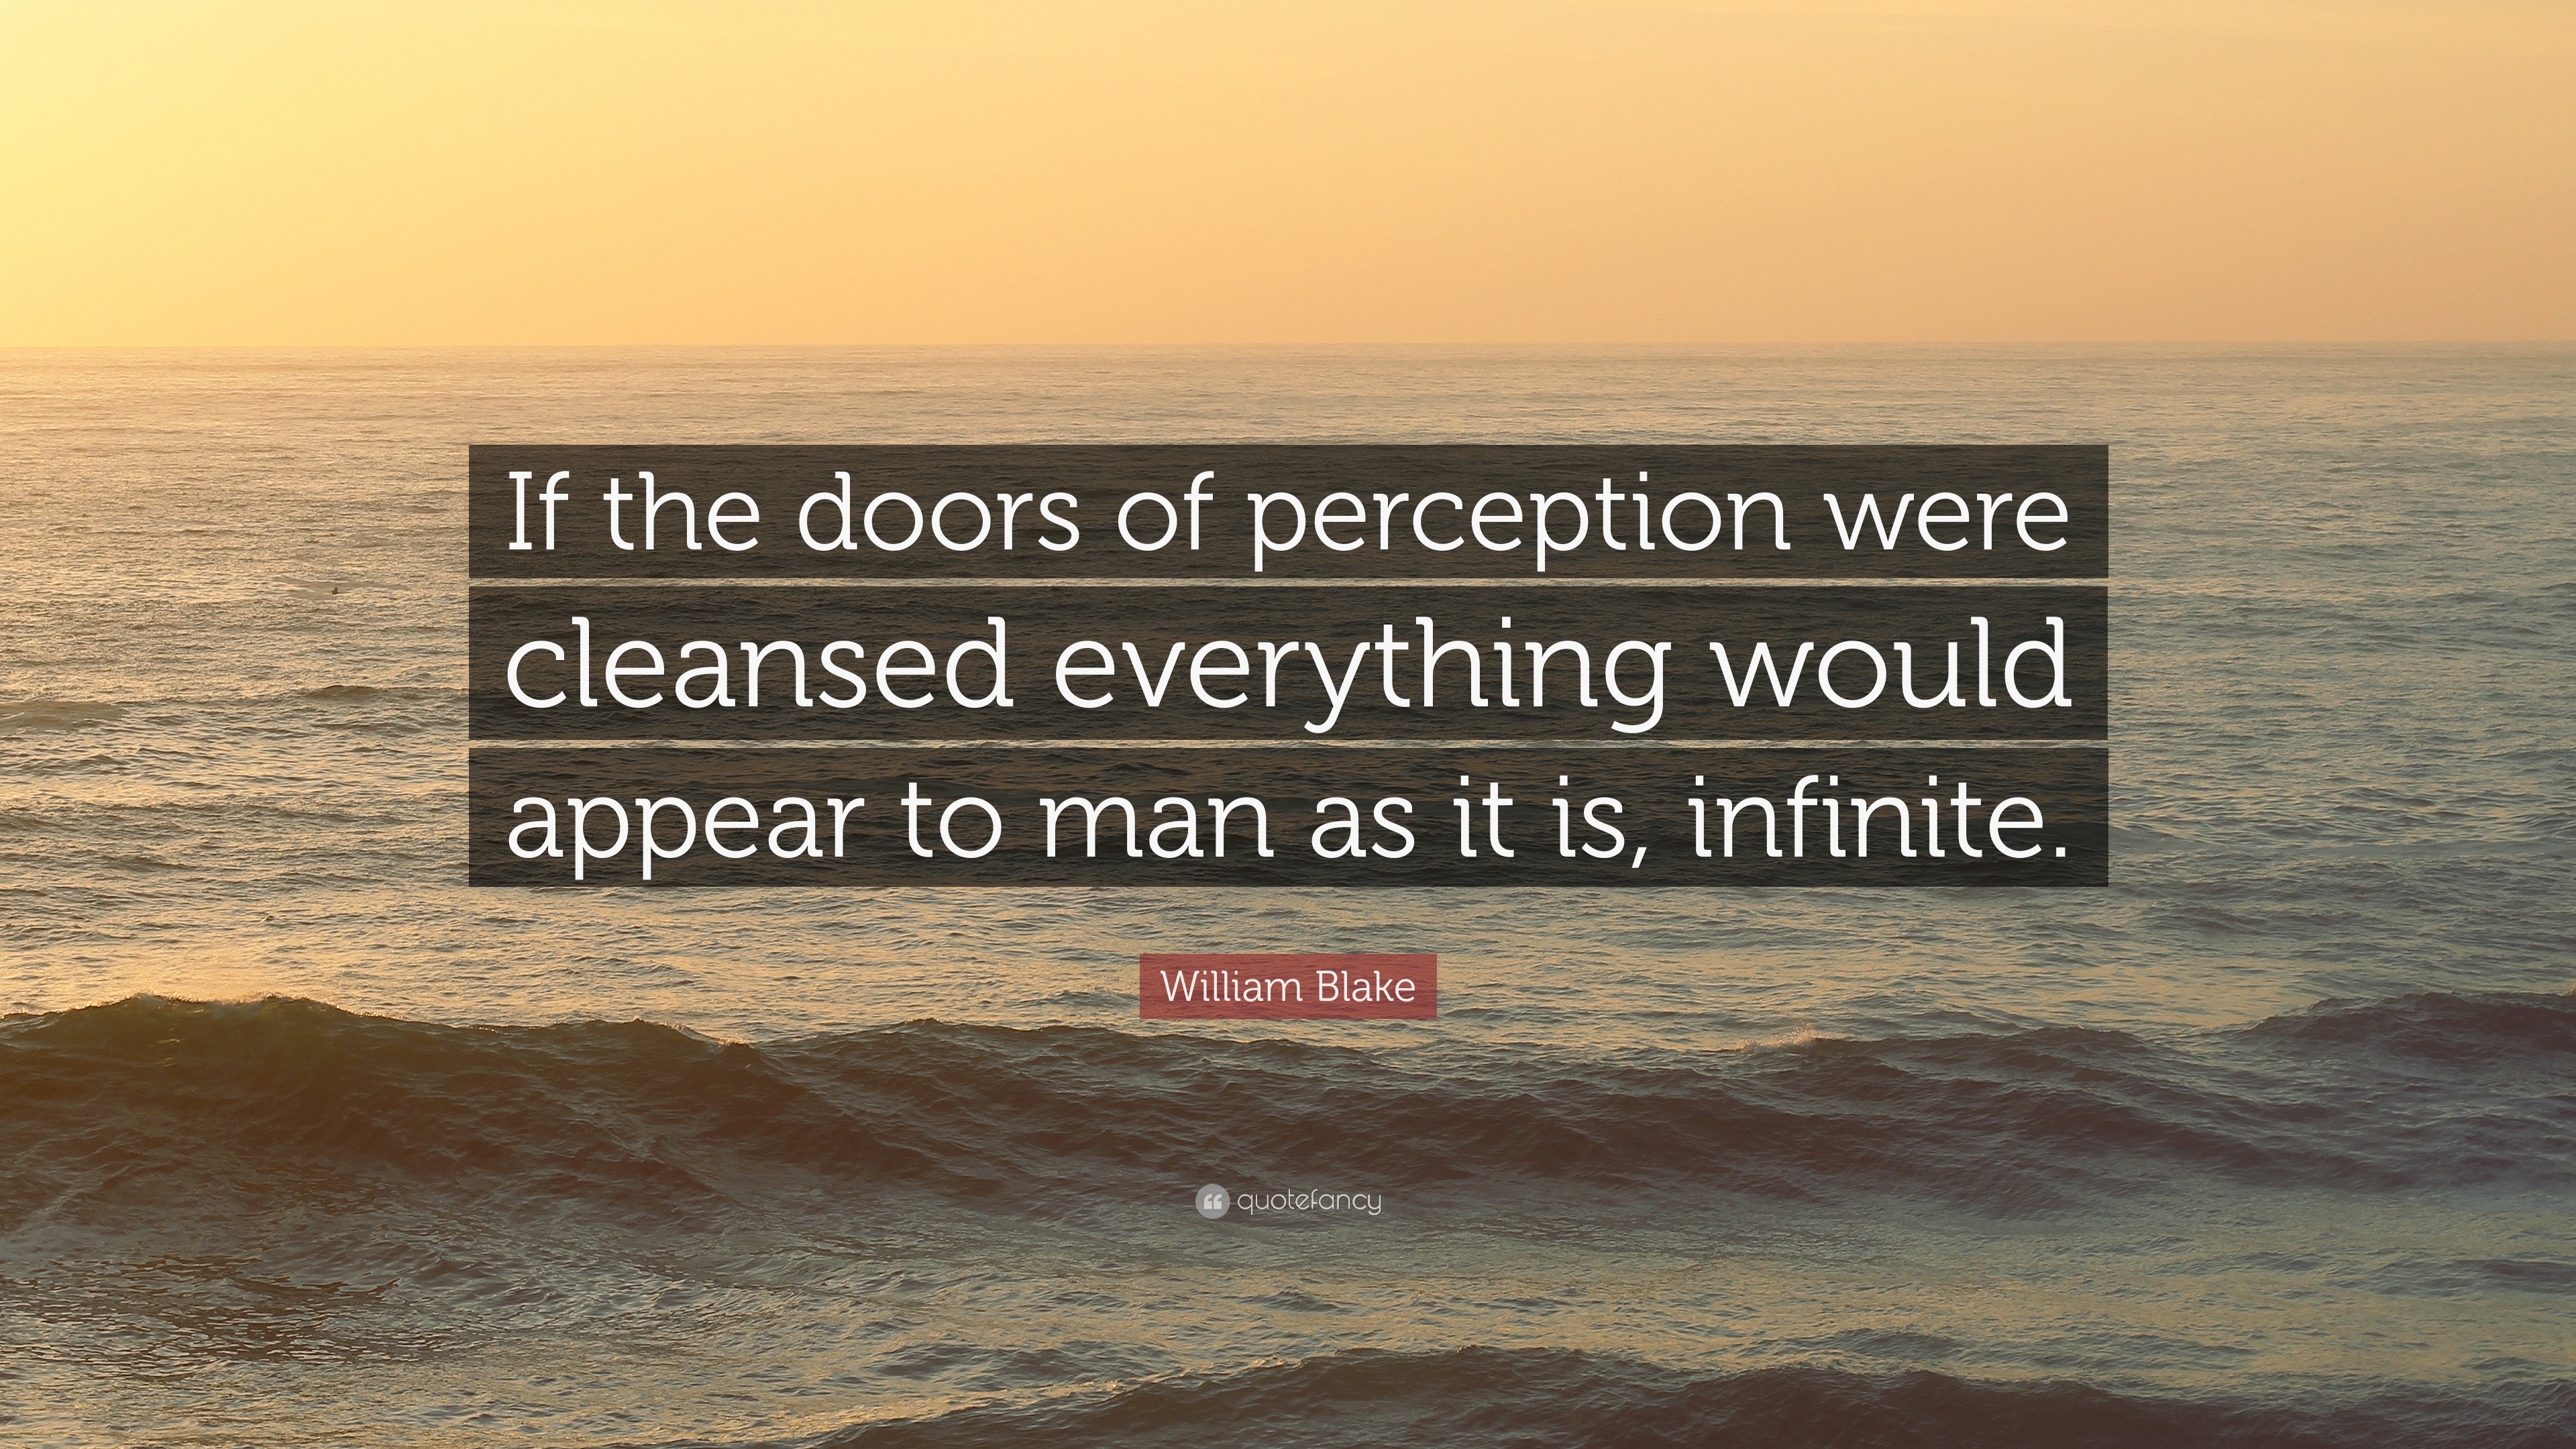 William Blake Quote: “If the doors of perception were cleansed